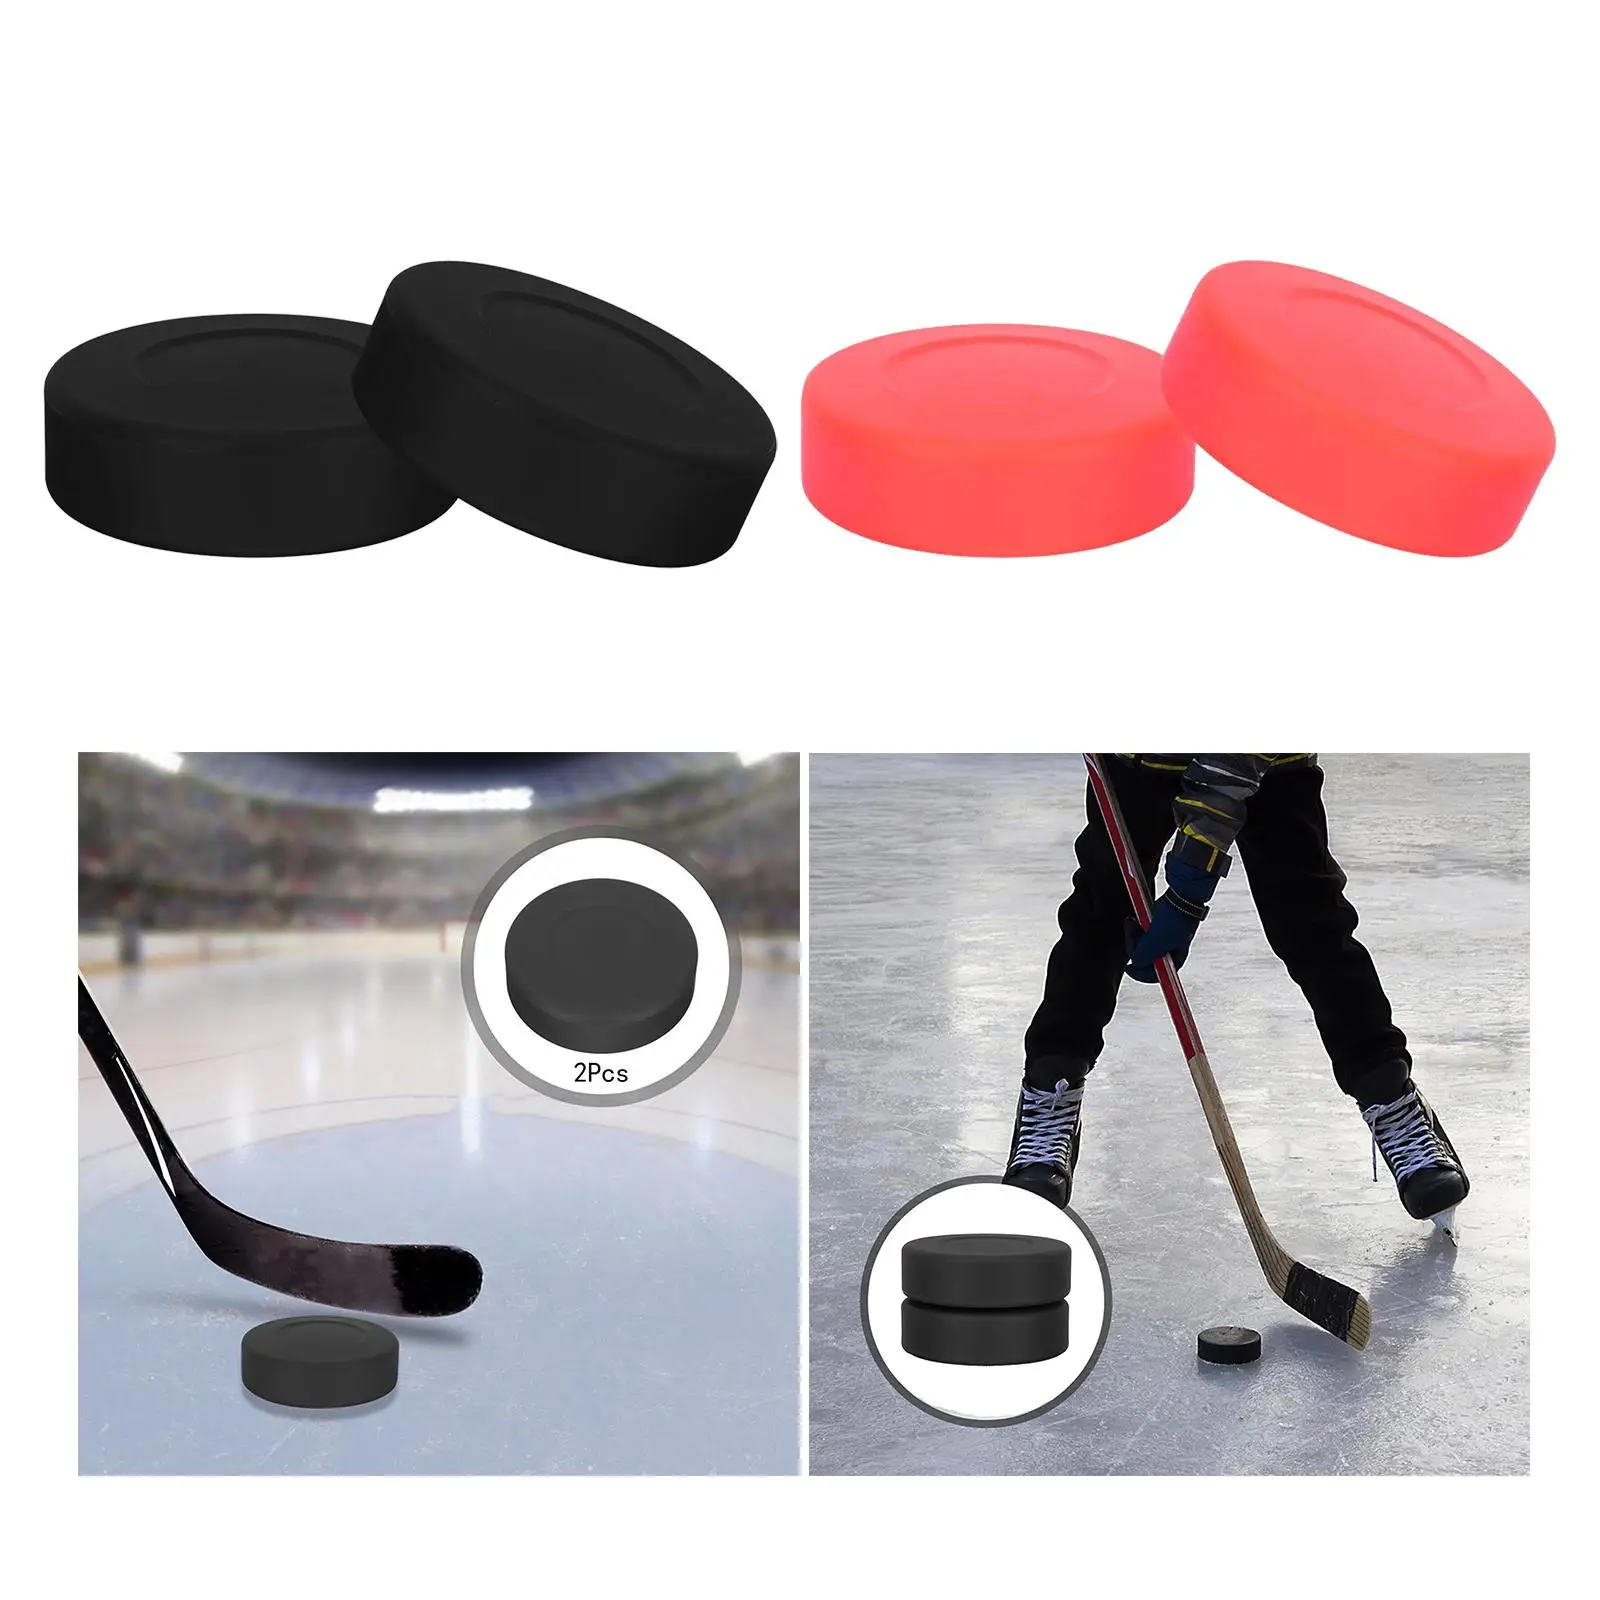 2 Pieces Ice Hockey Puck Multipurpose Smooth Sturdy Wear Resistant Hockey Ball for Starters Professionals Kids Training